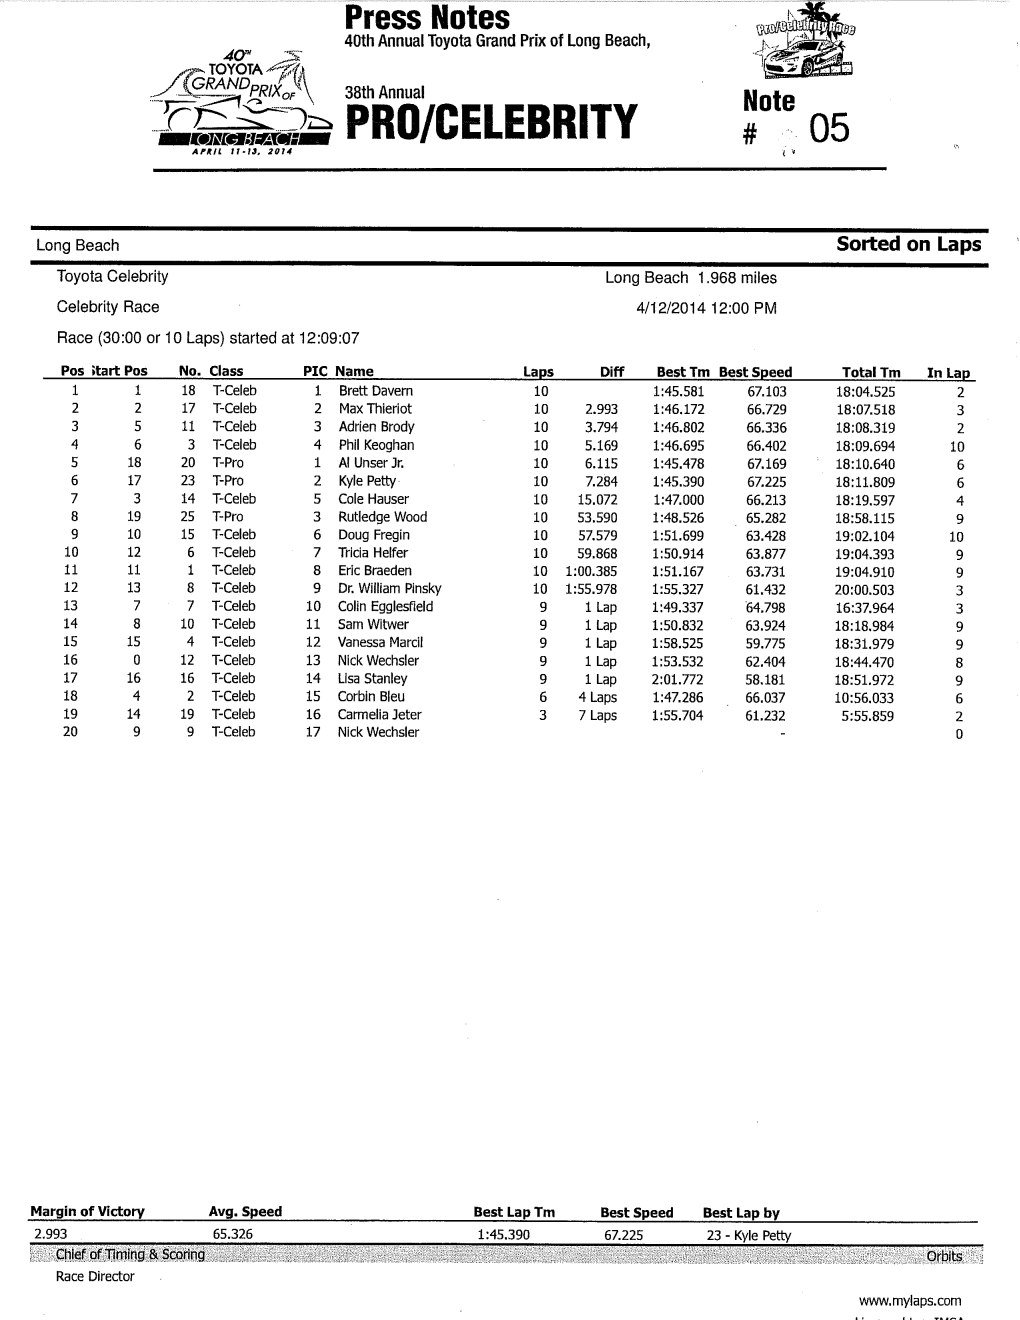 2014 Race Results